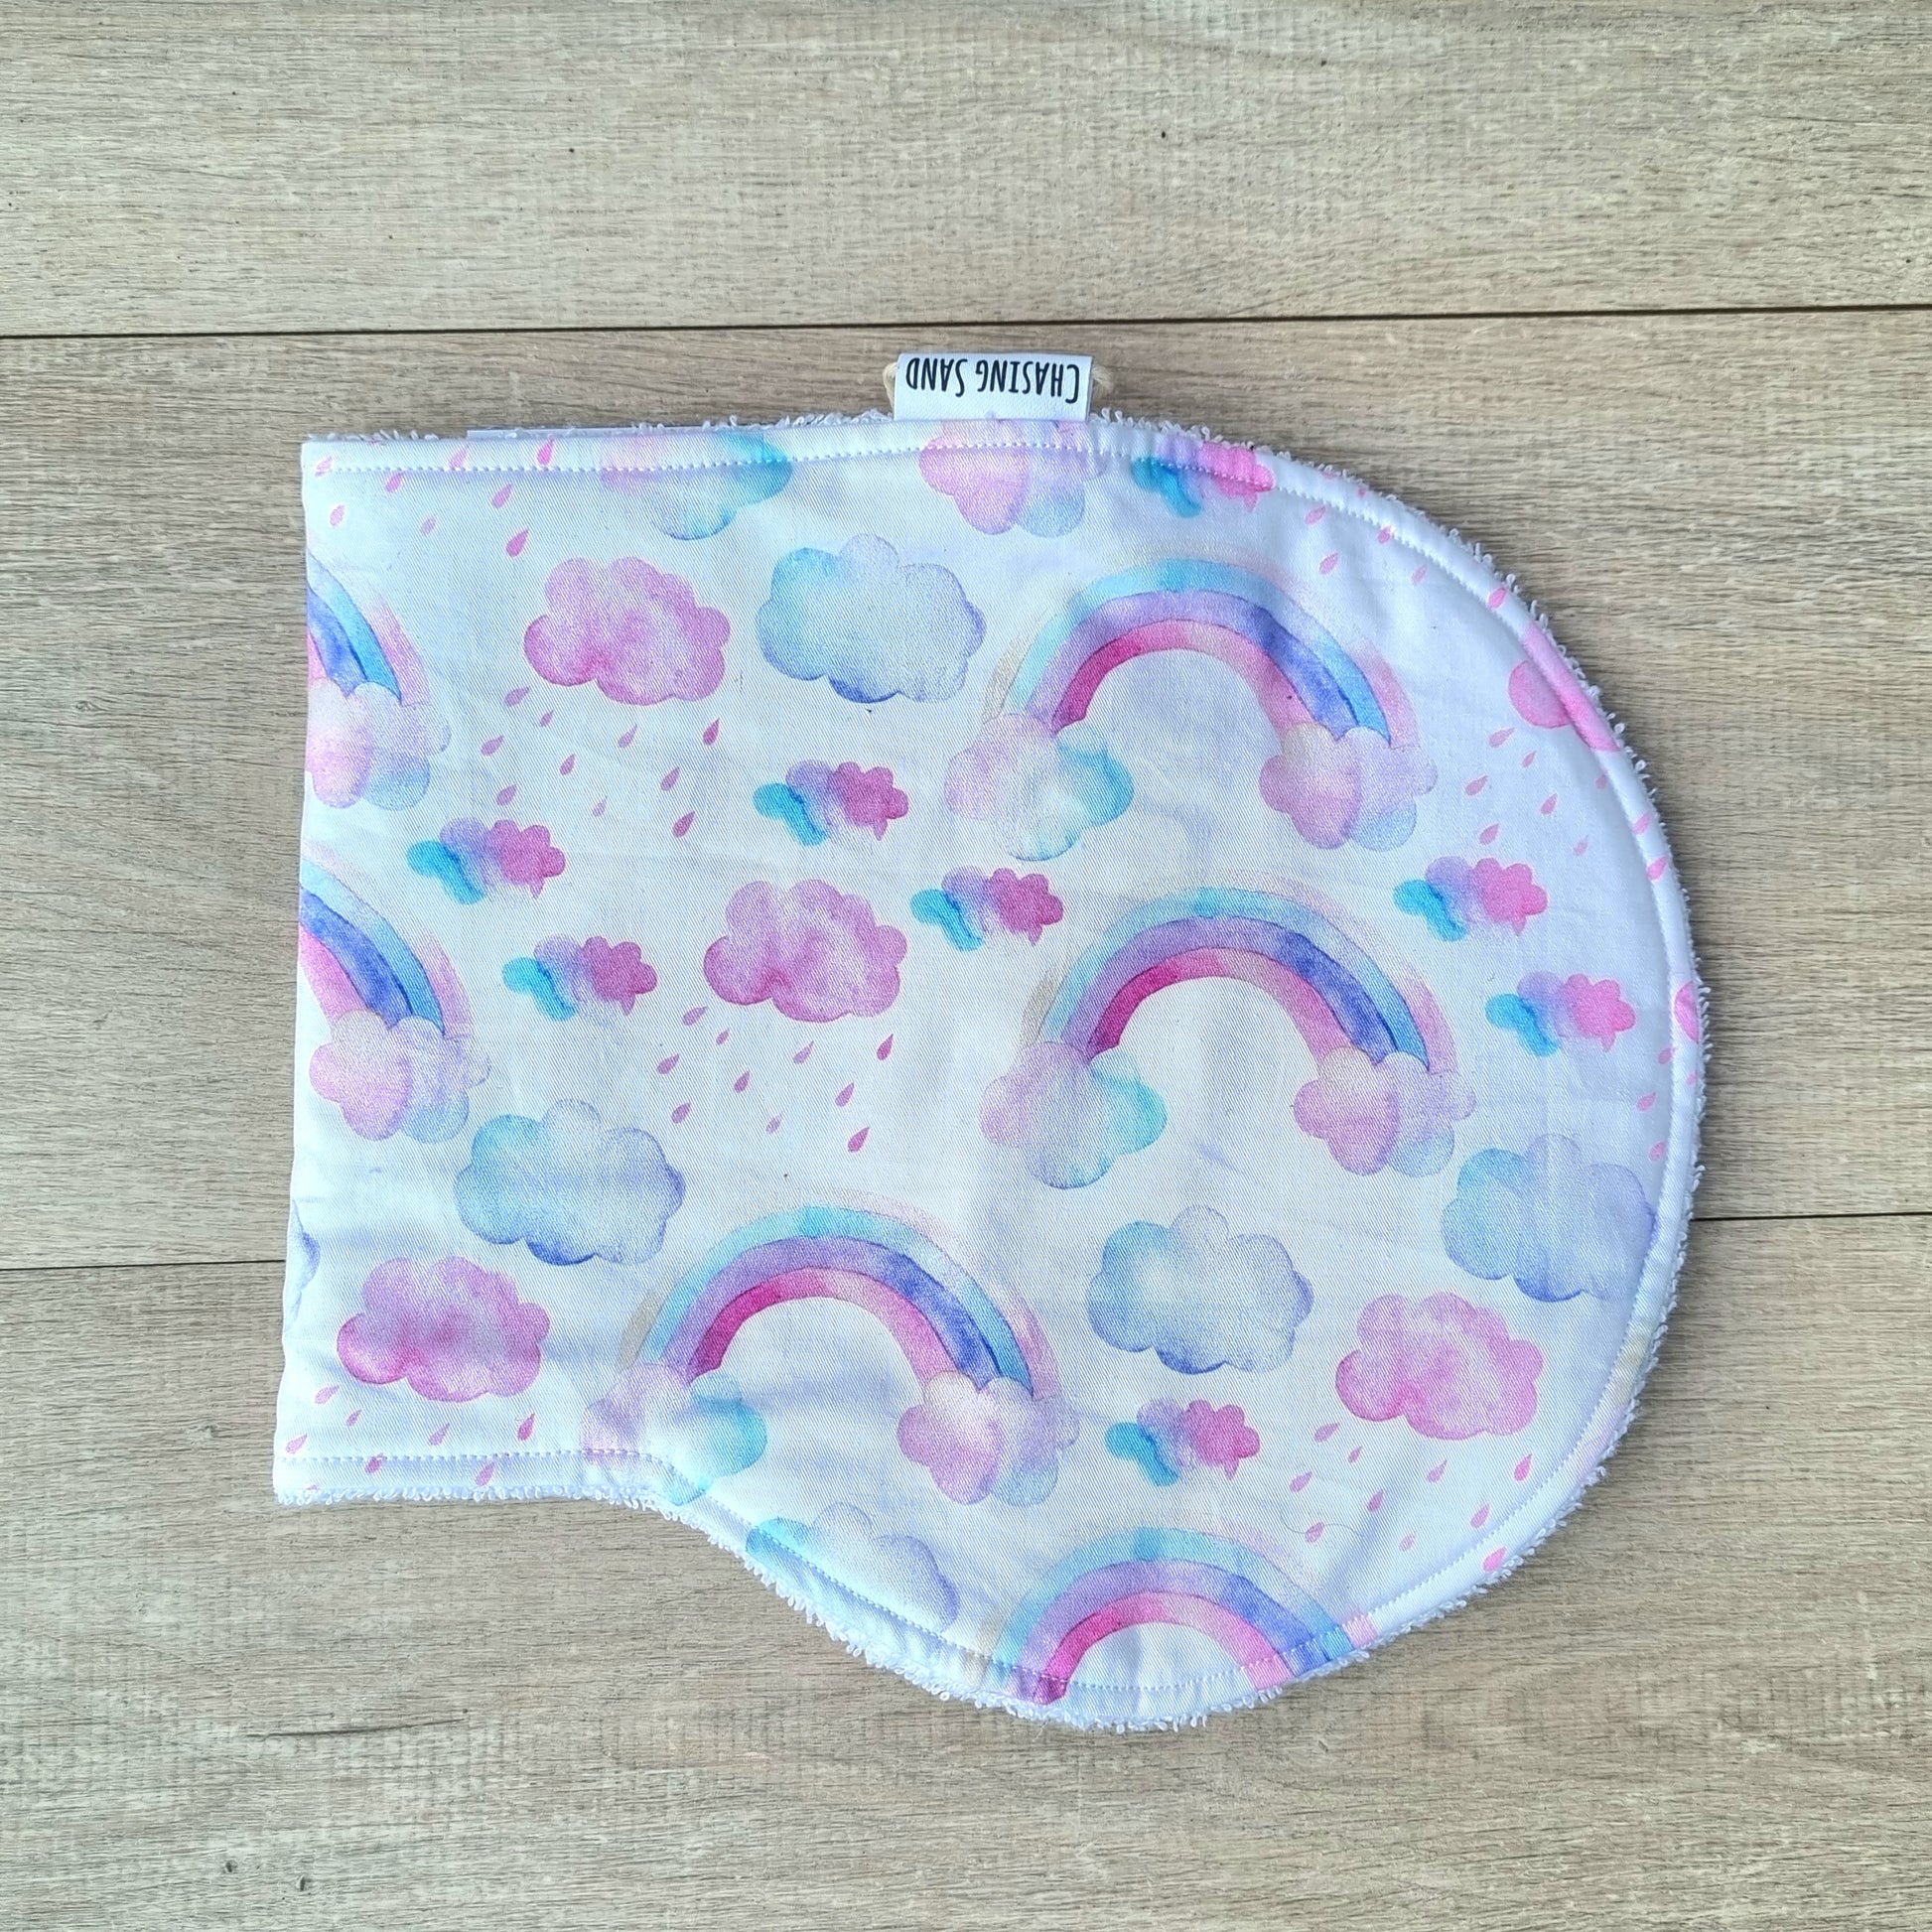 Burp Cloth - Pink Rainbows against wooden backdrop. Pink and purple watercolour rainbows and clouds against white background.